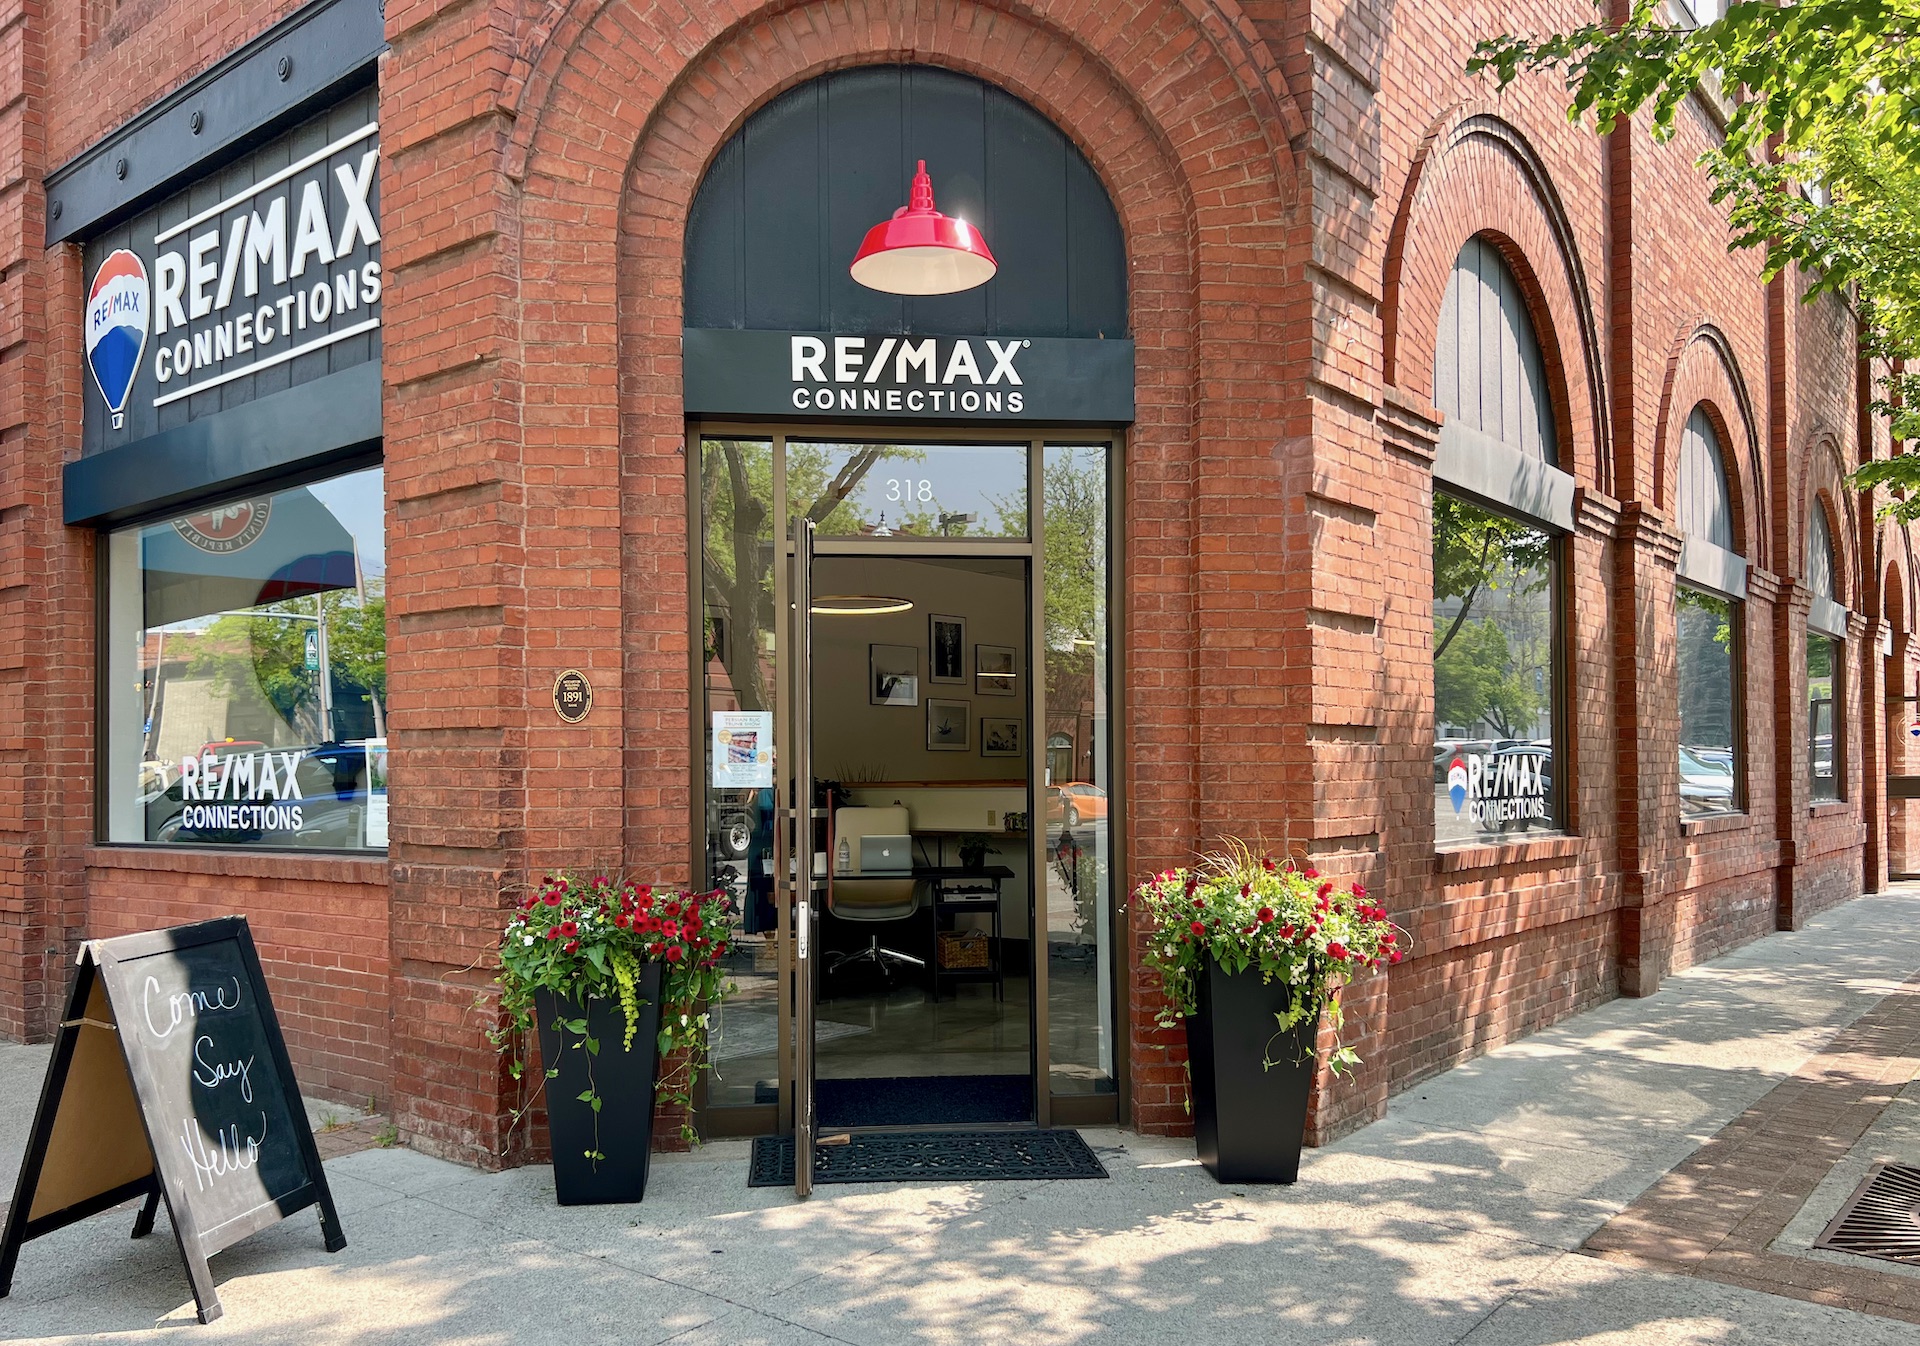 RE/MAX Connections